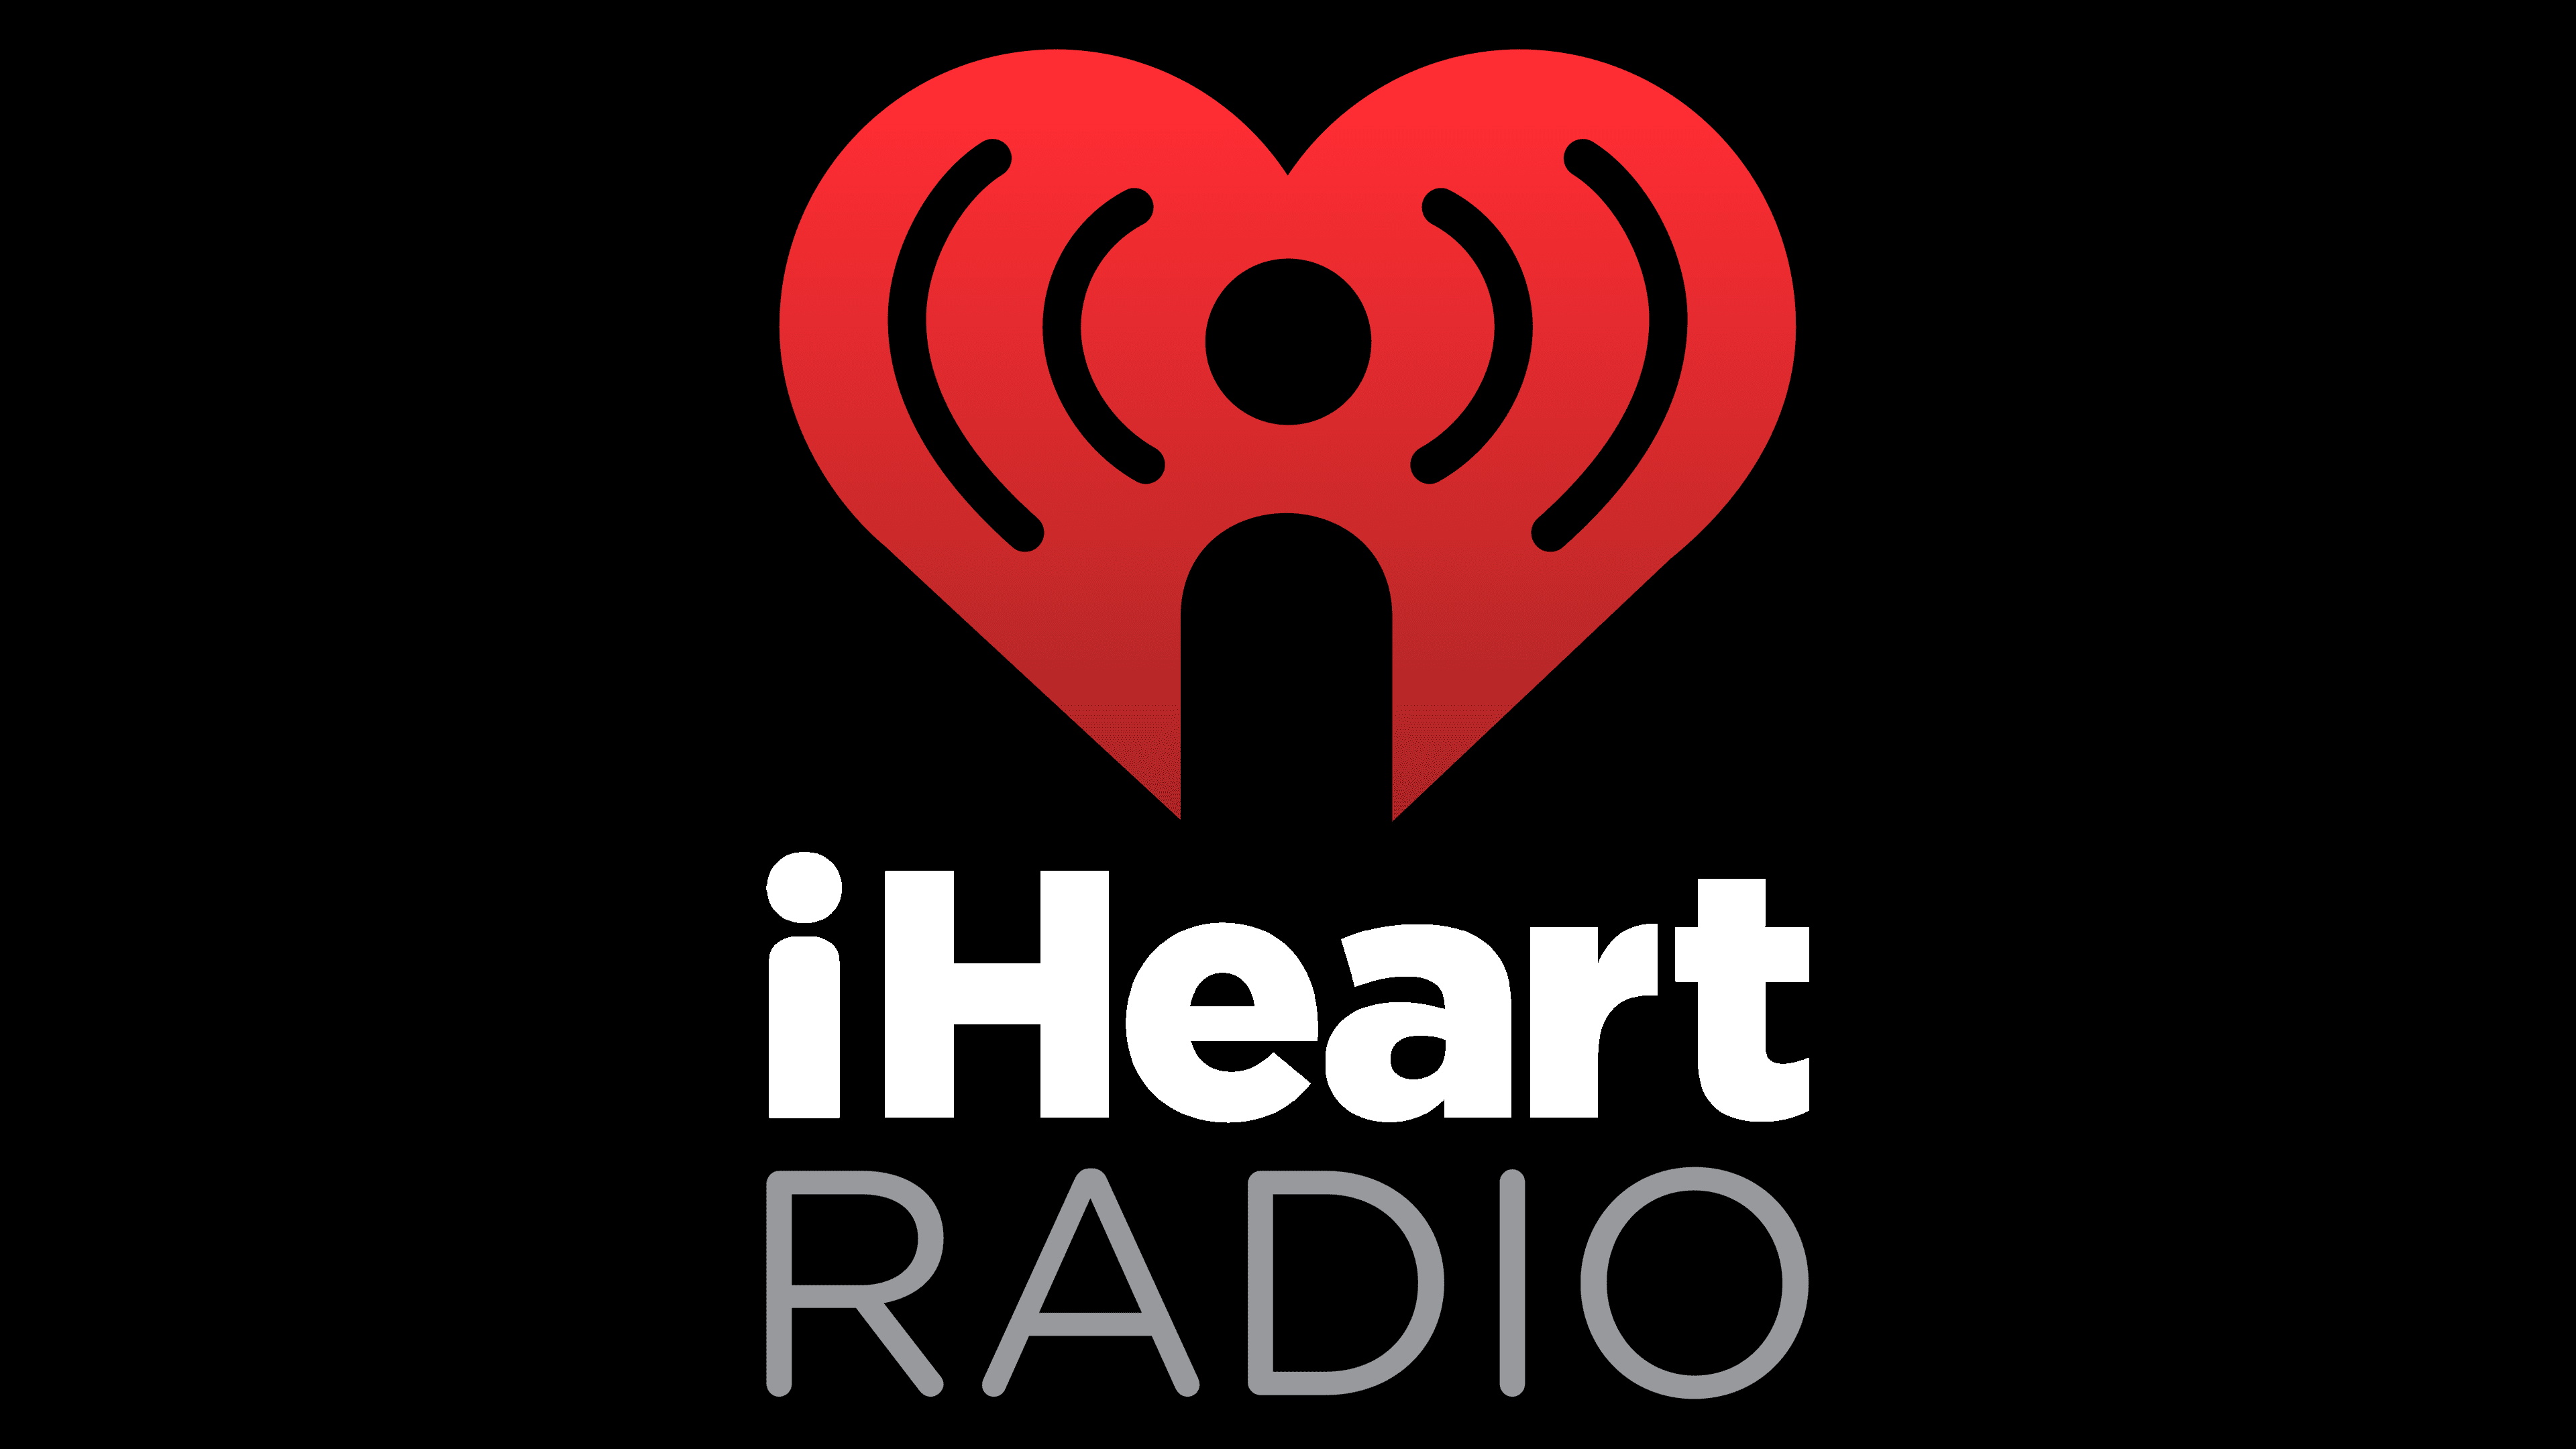 iHeartRadio Logo, PNG, Symbol, History, Meaning